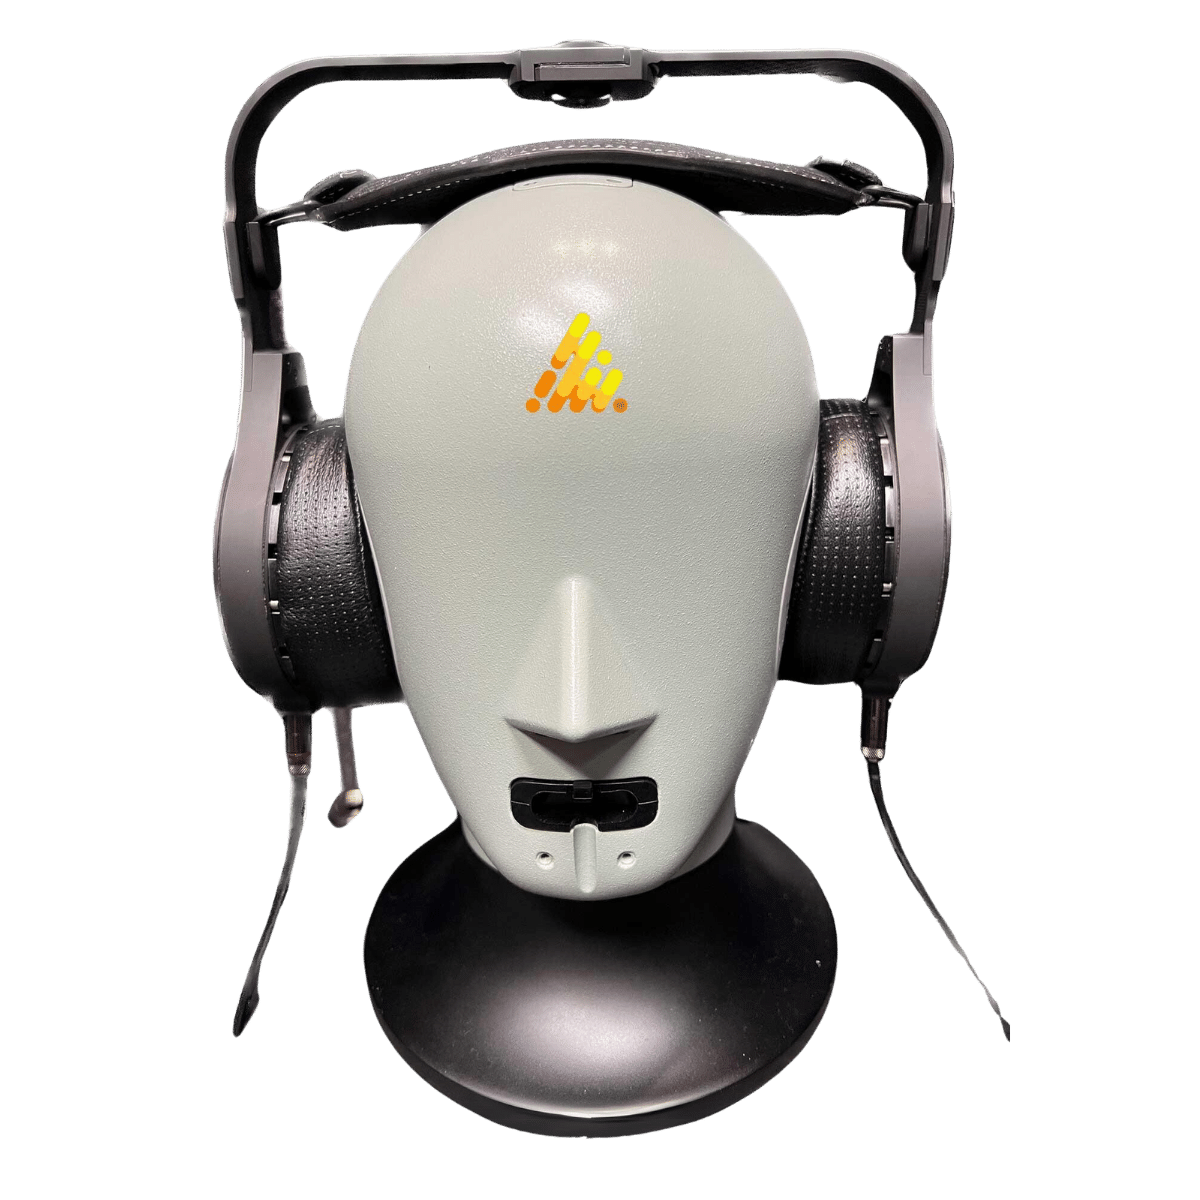 The Abyss AB-1266 Phi TC headphones on mannequin head